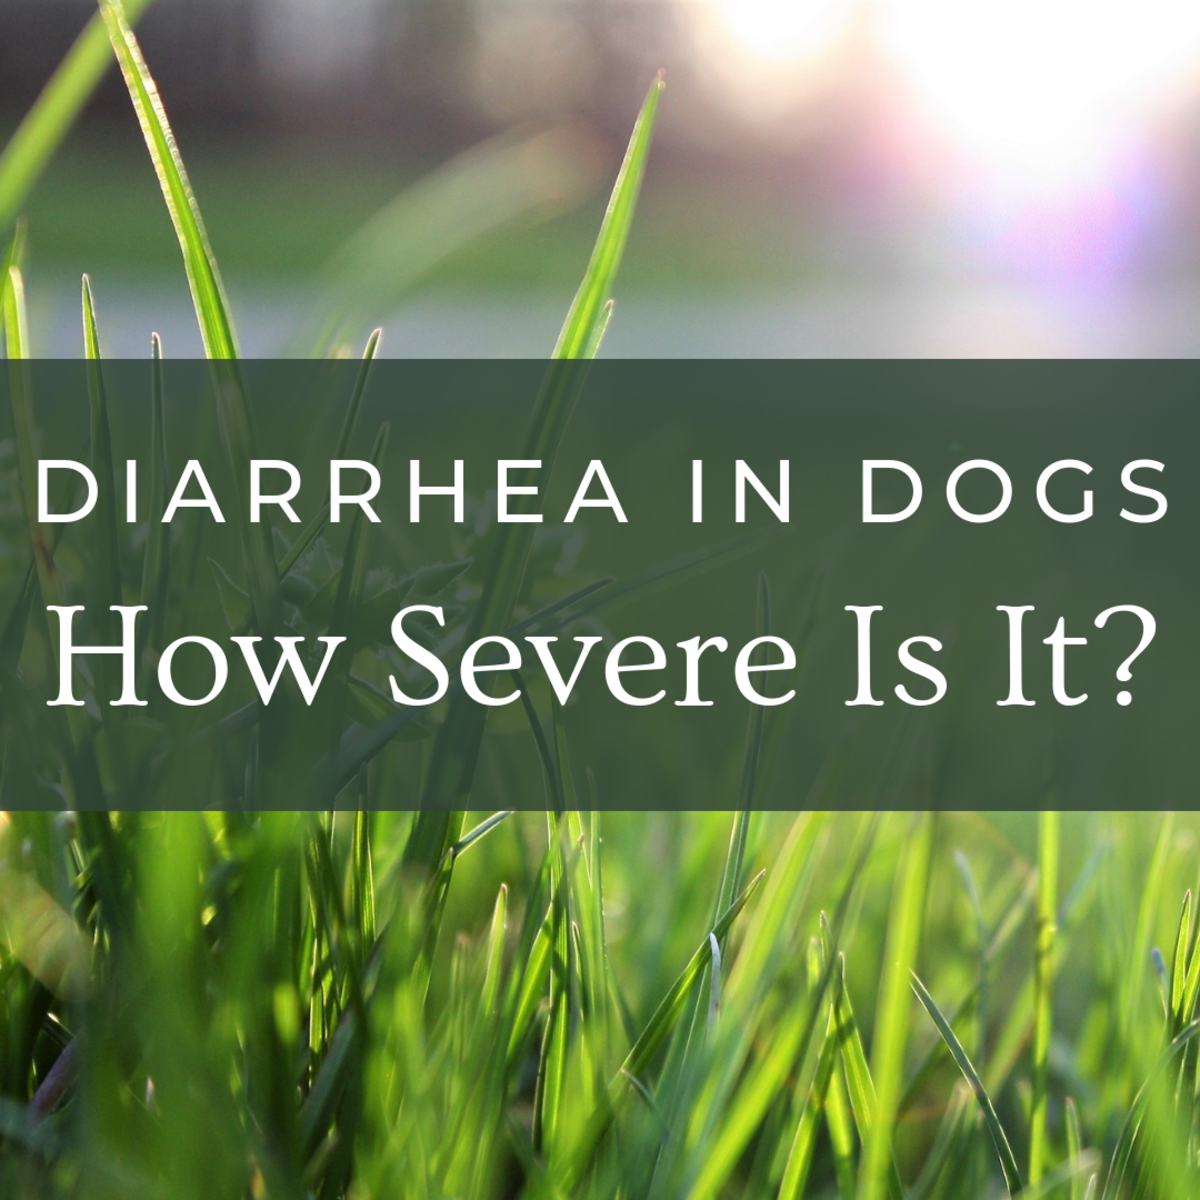 If your dog has diarrhea, there are a few home remedies you can try. 